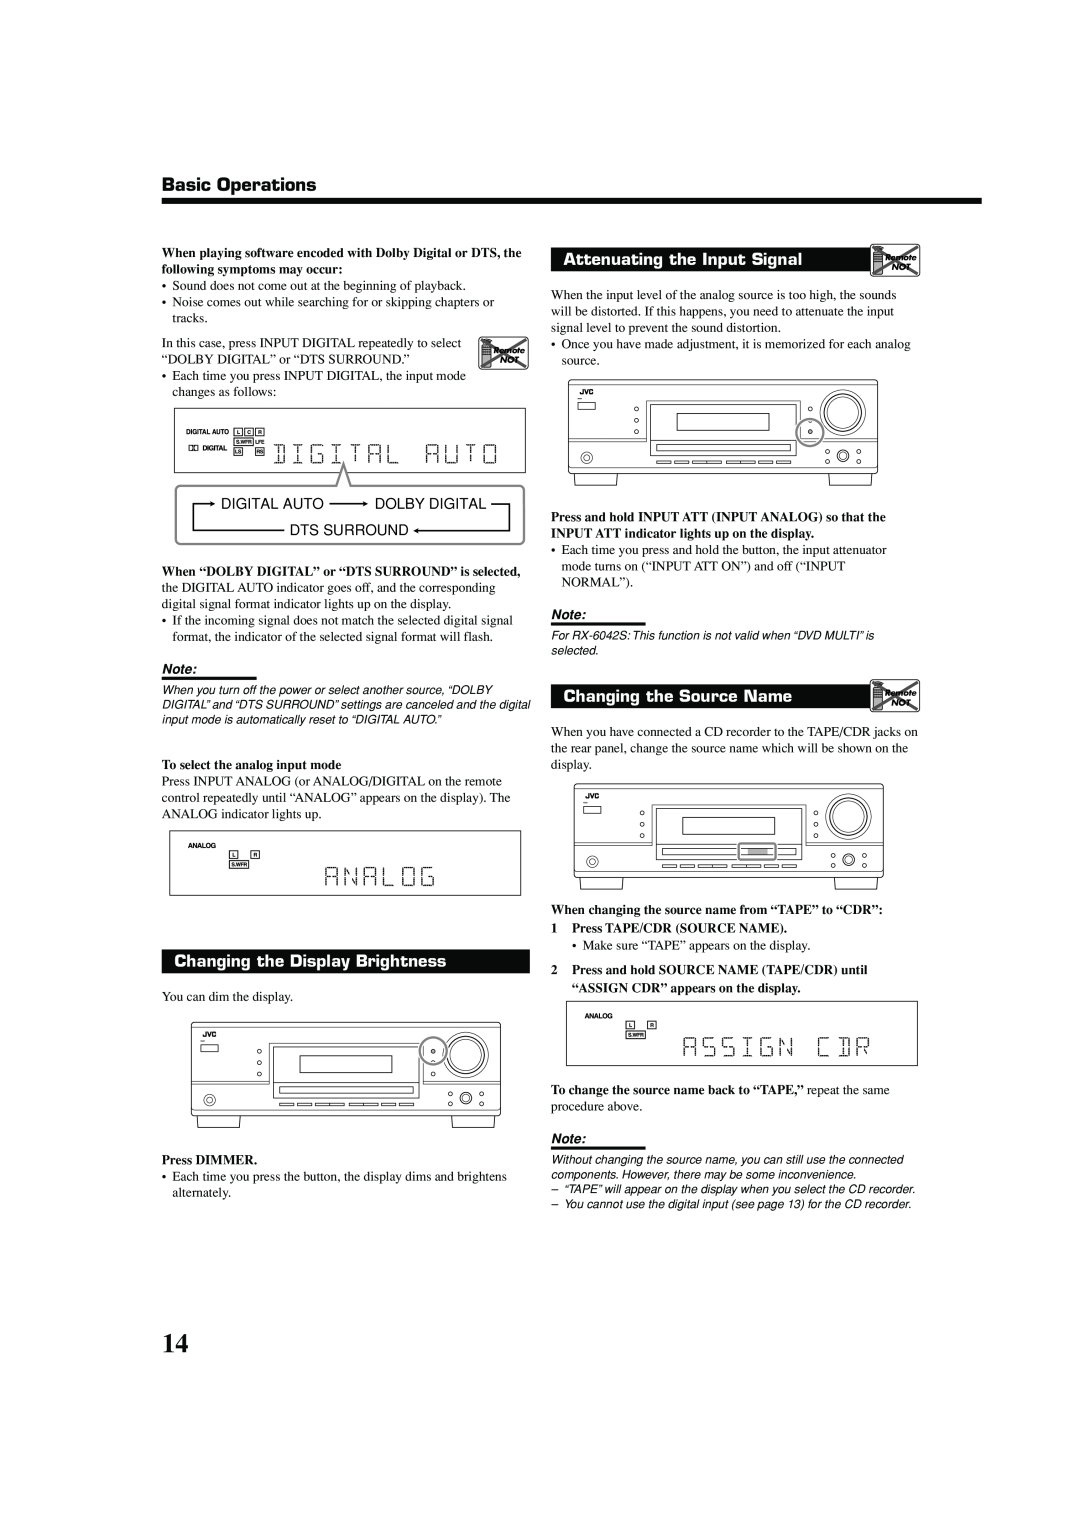 JVC 0404RYMMDWJEIN, LVT1140-007A Attenuating the Input Signal, Changing the Display Brightness, Changing the Source Name 